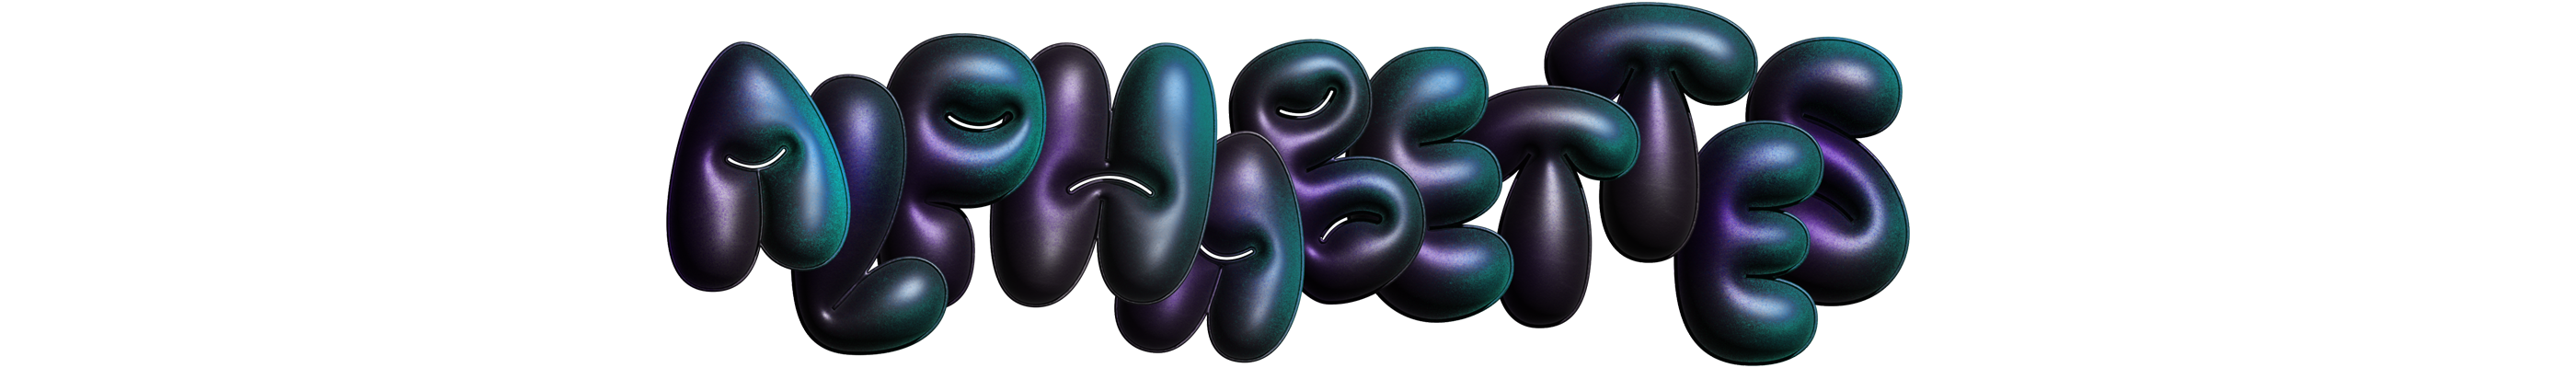 Alphabettes header using an inflated effect with round uppercase characters dancing on top of each other. Gradient colours using tale, purple and black tones.